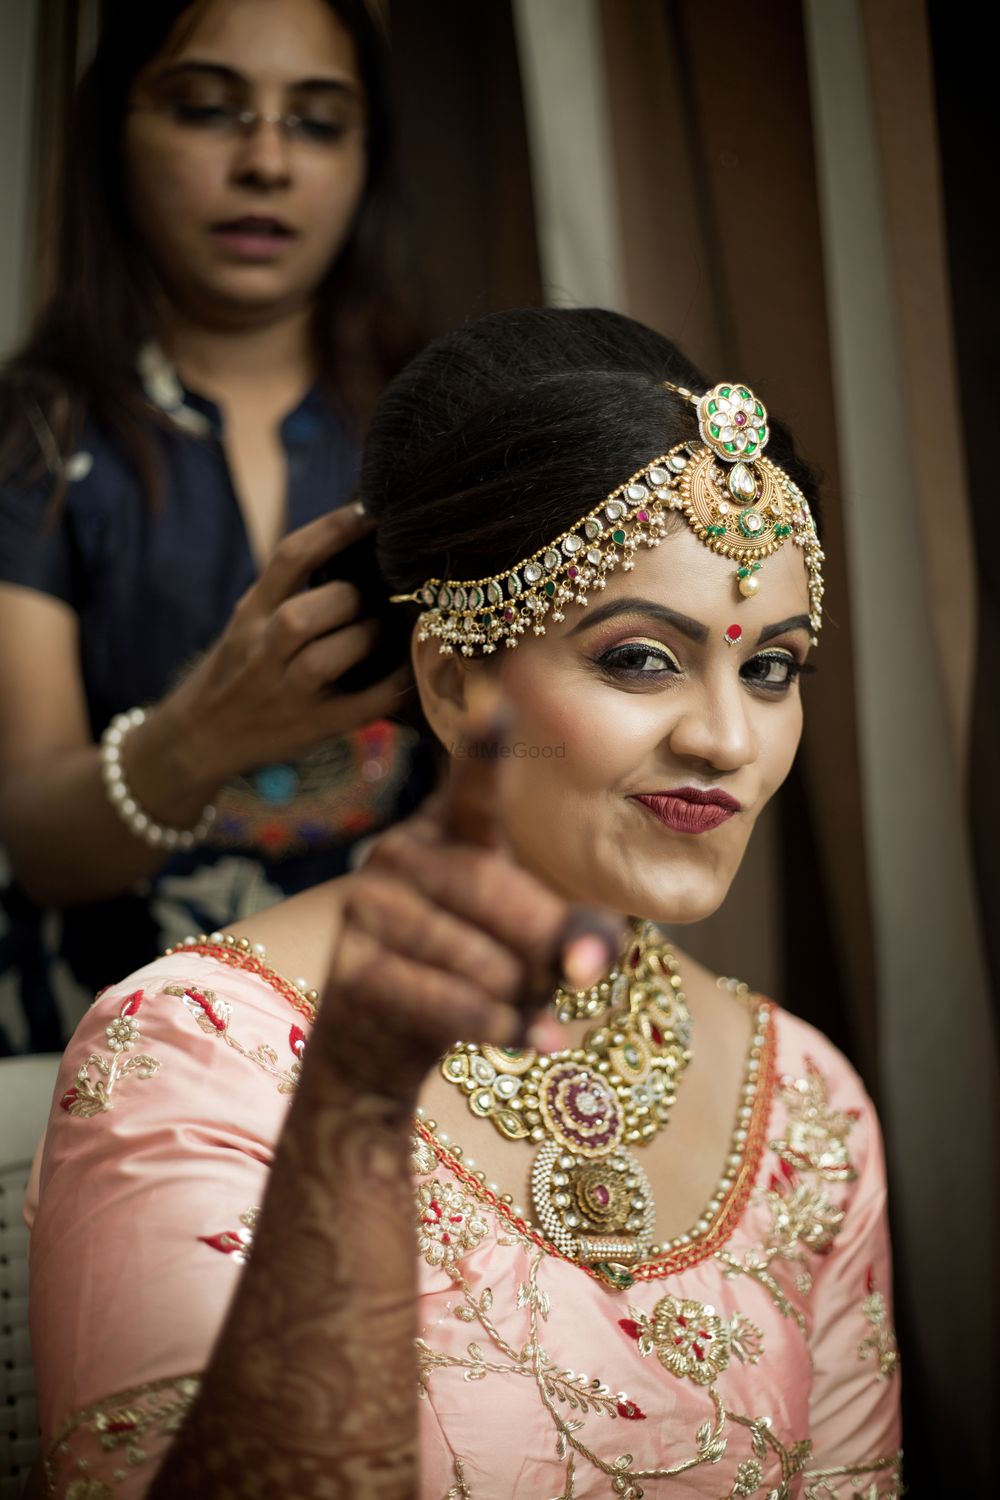 Photo From Poonam Weds Alpesh - By VcubeOgraphy